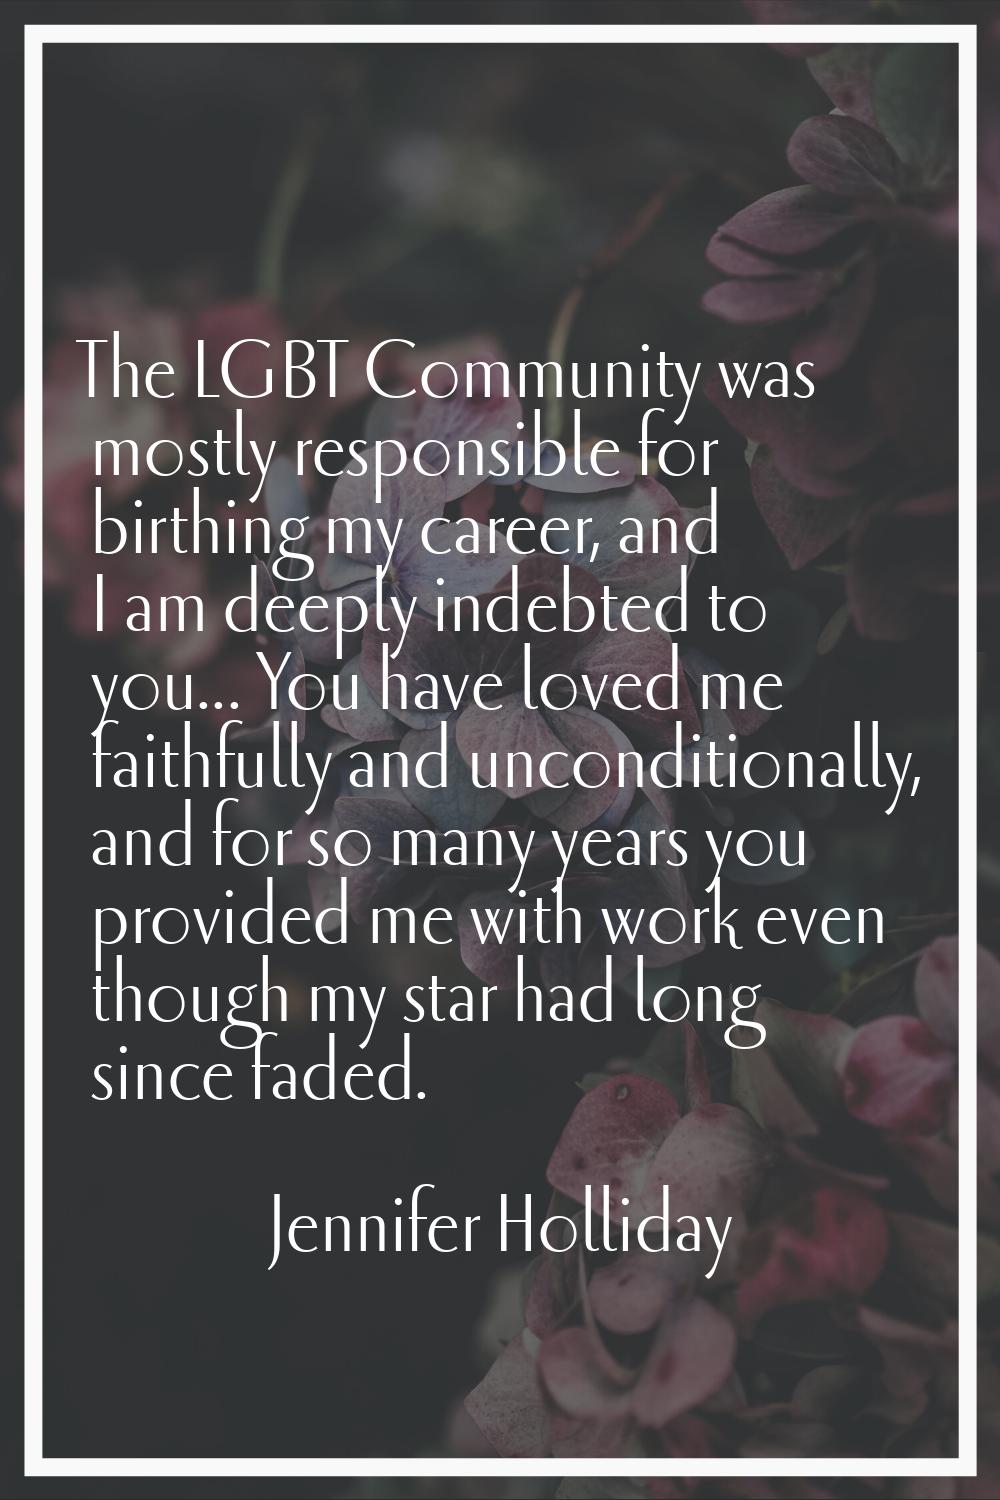 The LGBT Community was mostly responsible for birthing my career, and I am deeply indebted to you..